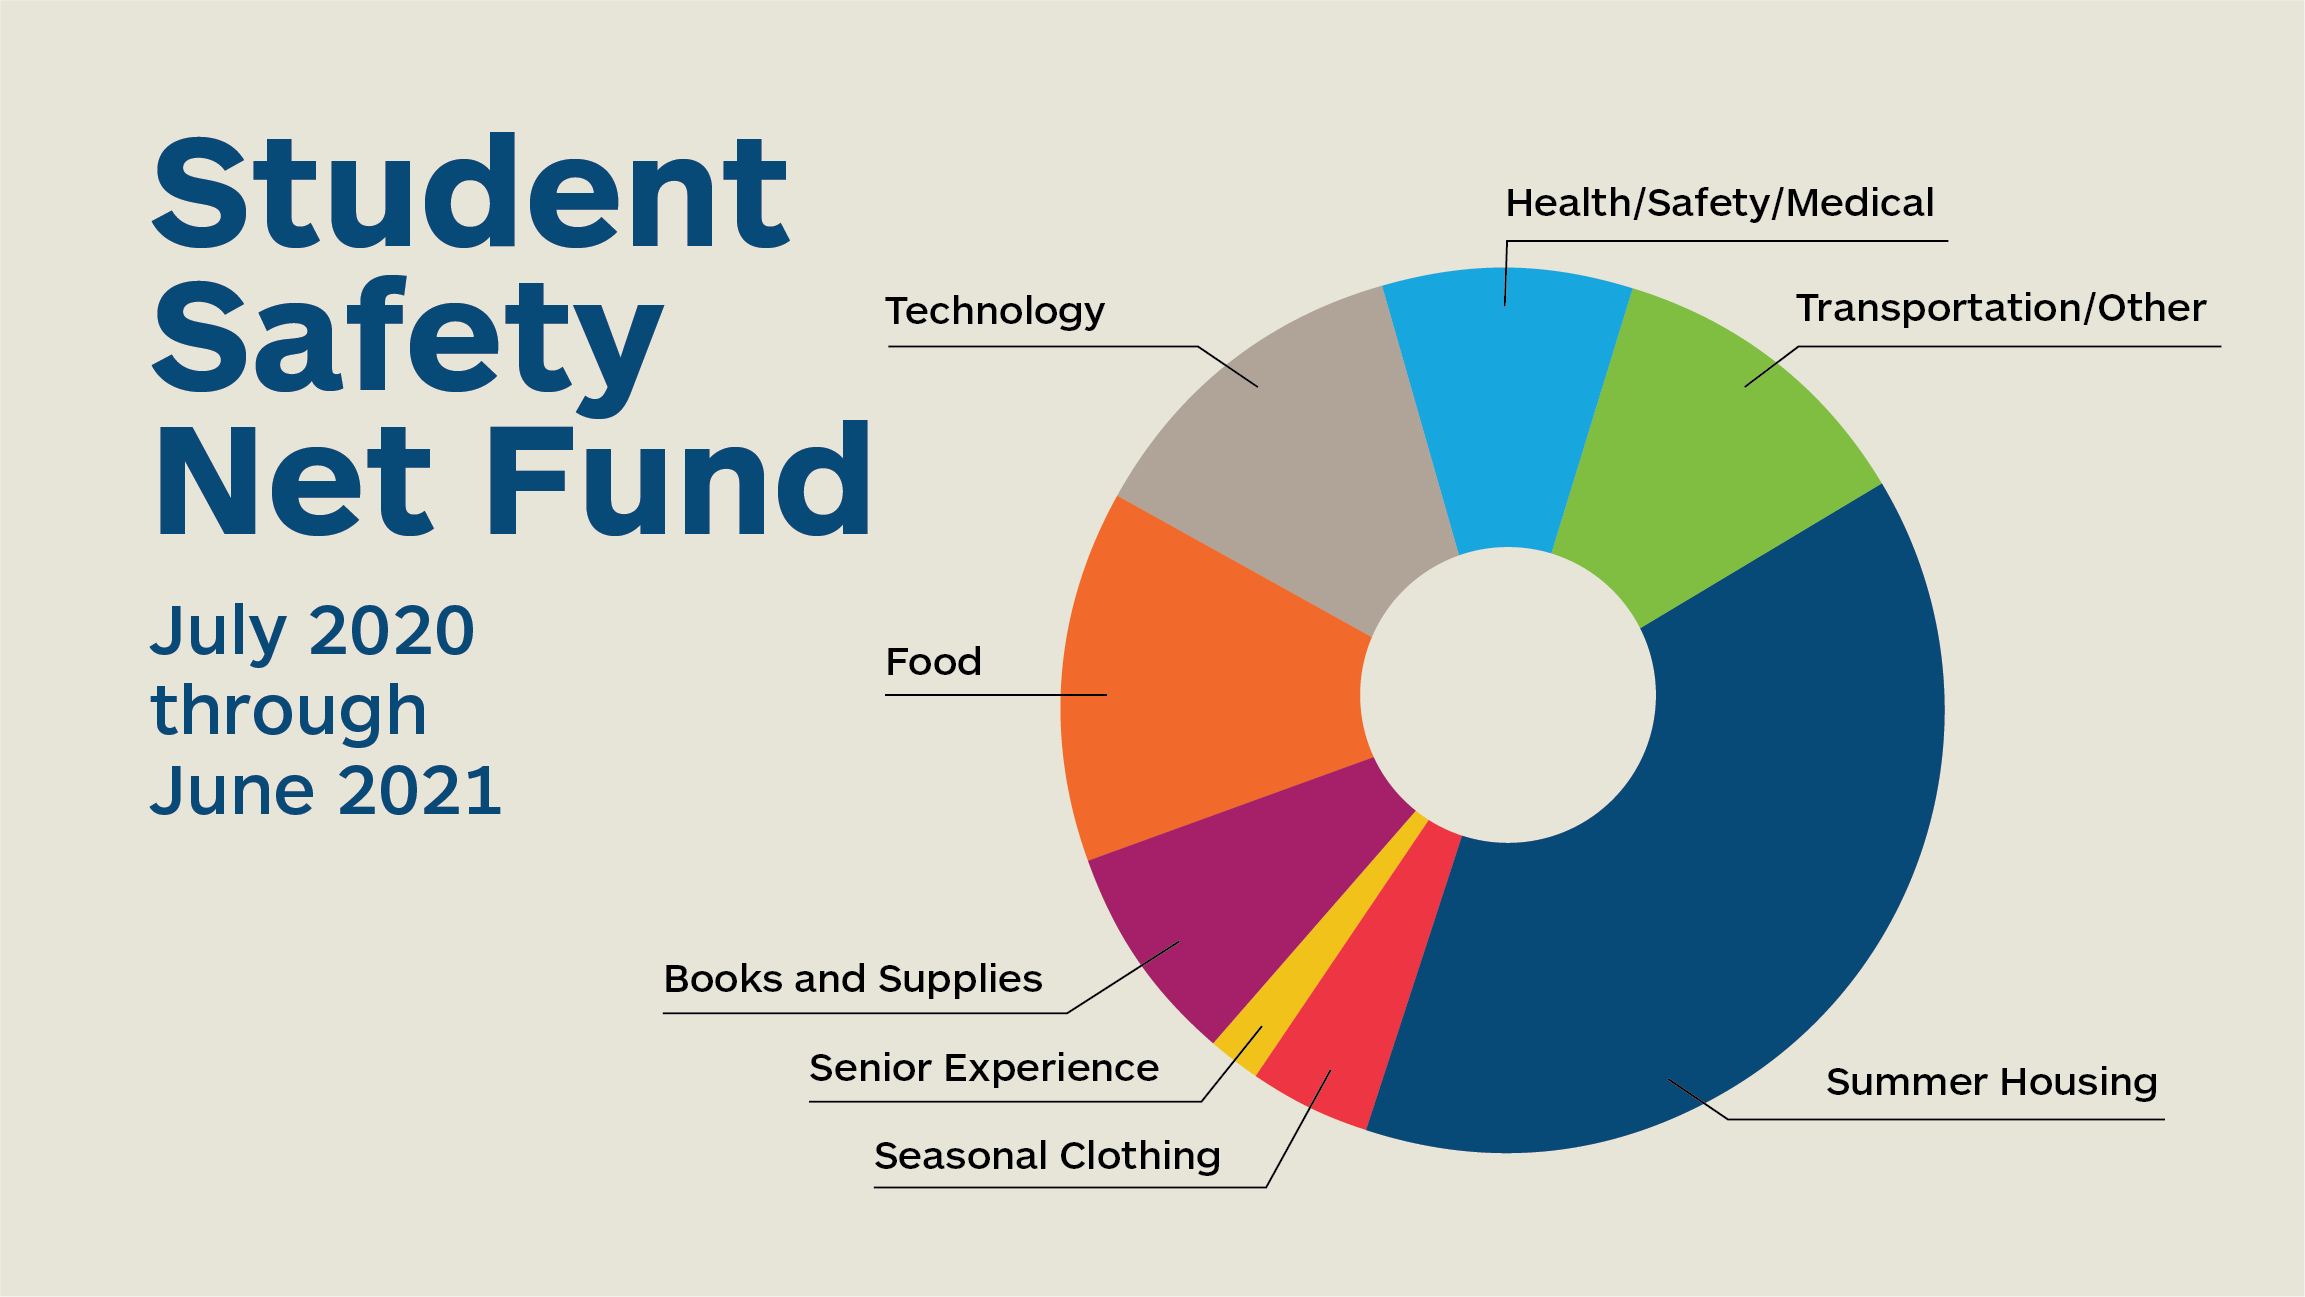 Student Safety Net Fund: Pie chart depicting the areas of support provided, from summer housing to technology to food, books and supplies.